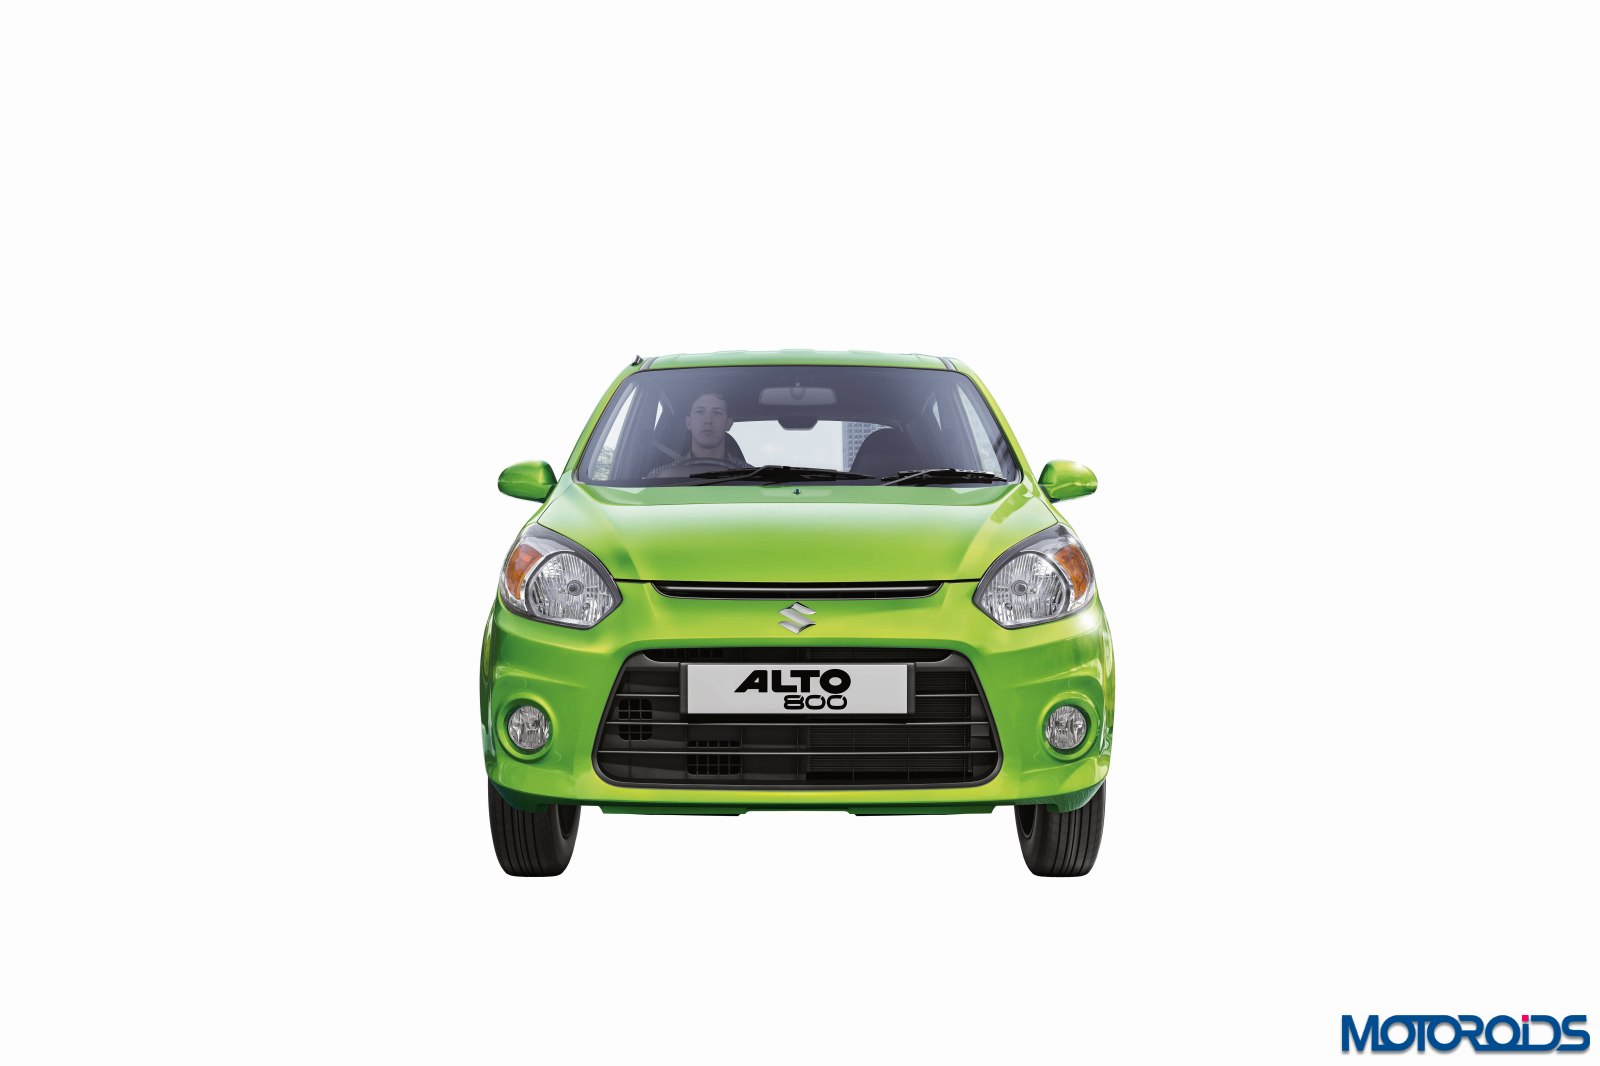 Official 2016 Maruti Suzuki Alto 800 Facelift Launched Priced